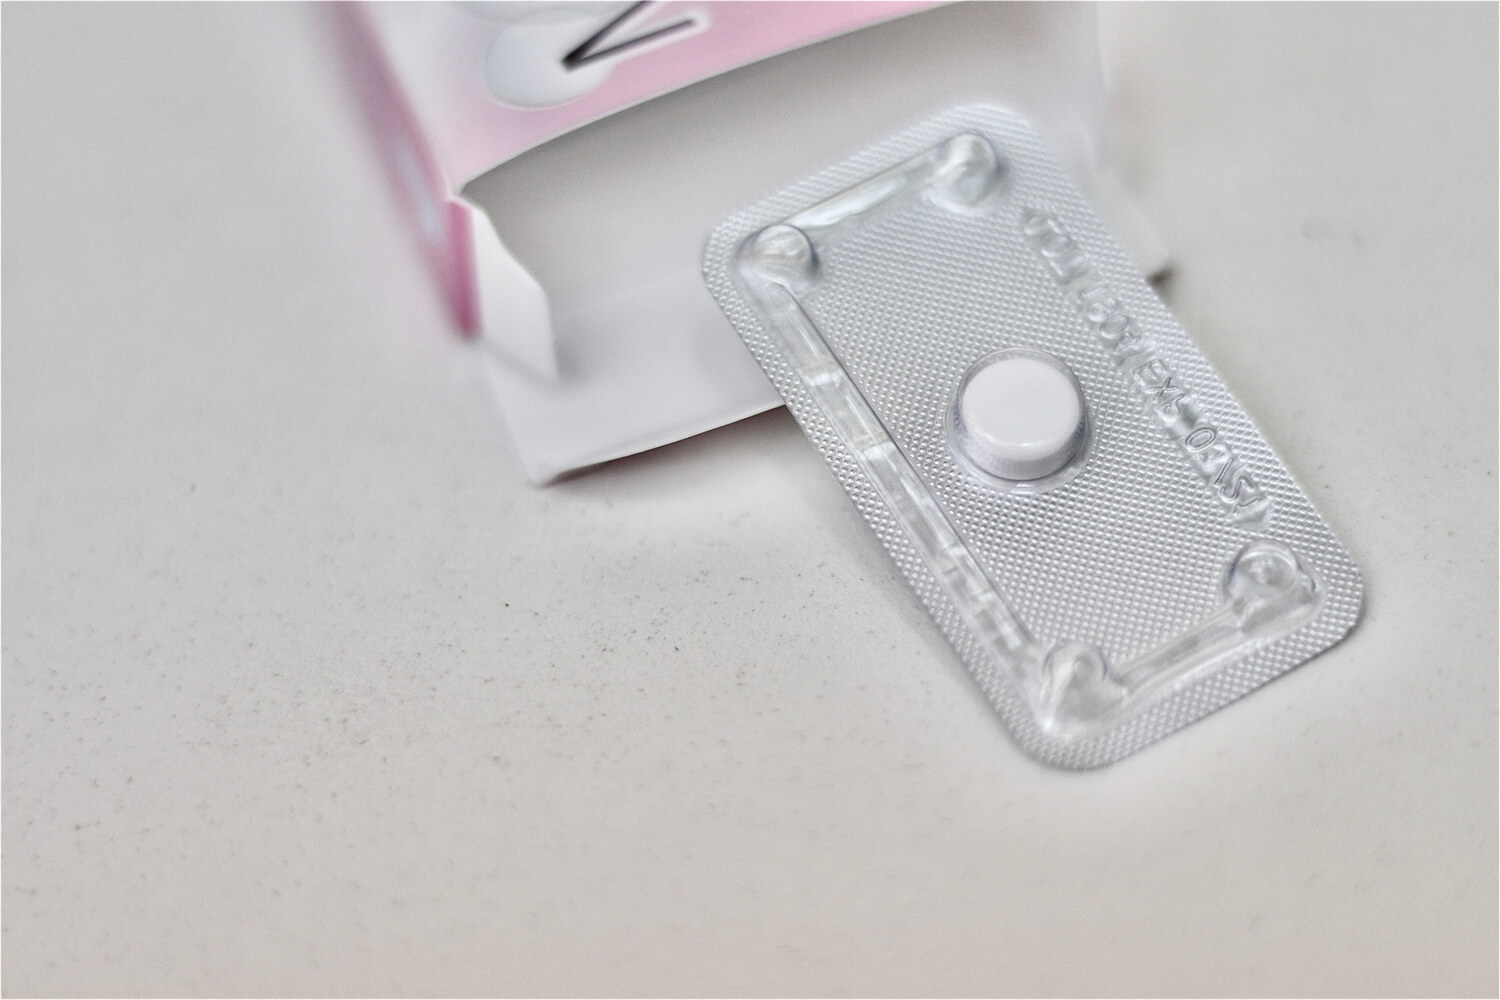 What Are The Types Of Emergency Contraceptive Pills